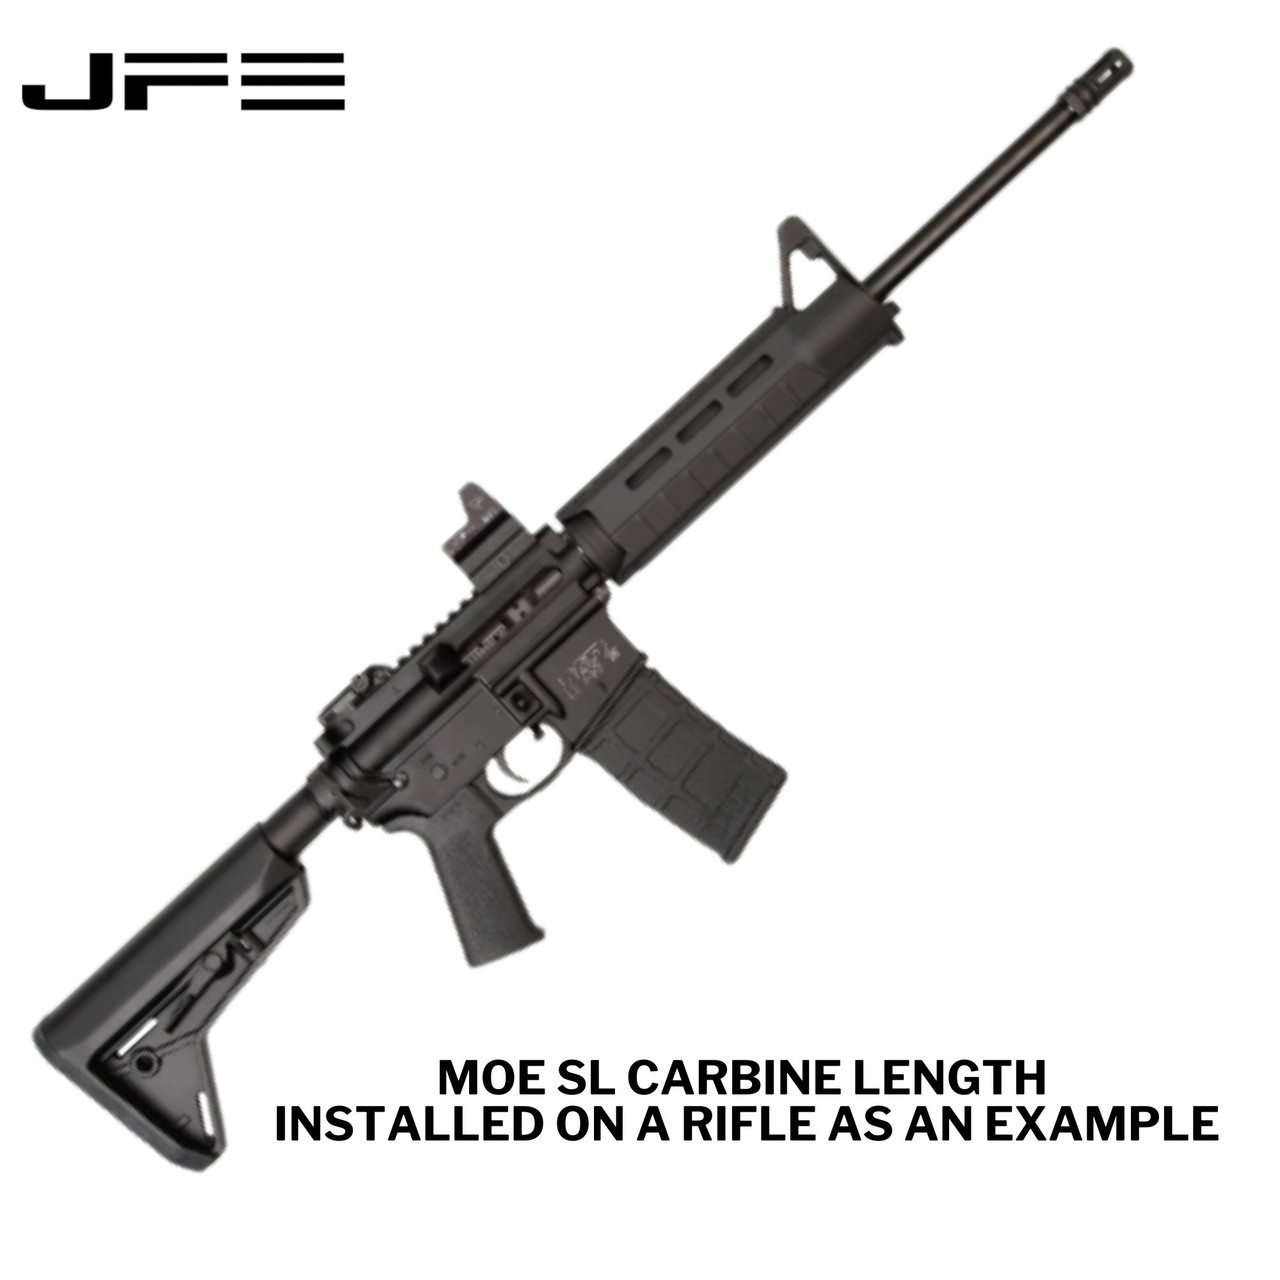 https://cdn11.bigcommerce.com/s-ph8cutvdkm/images/stencil/1280x1280/products/979/2673/JFE_Complete_Polymer_Pistol_Coating_2__00889.1695748064.jpg?c=2